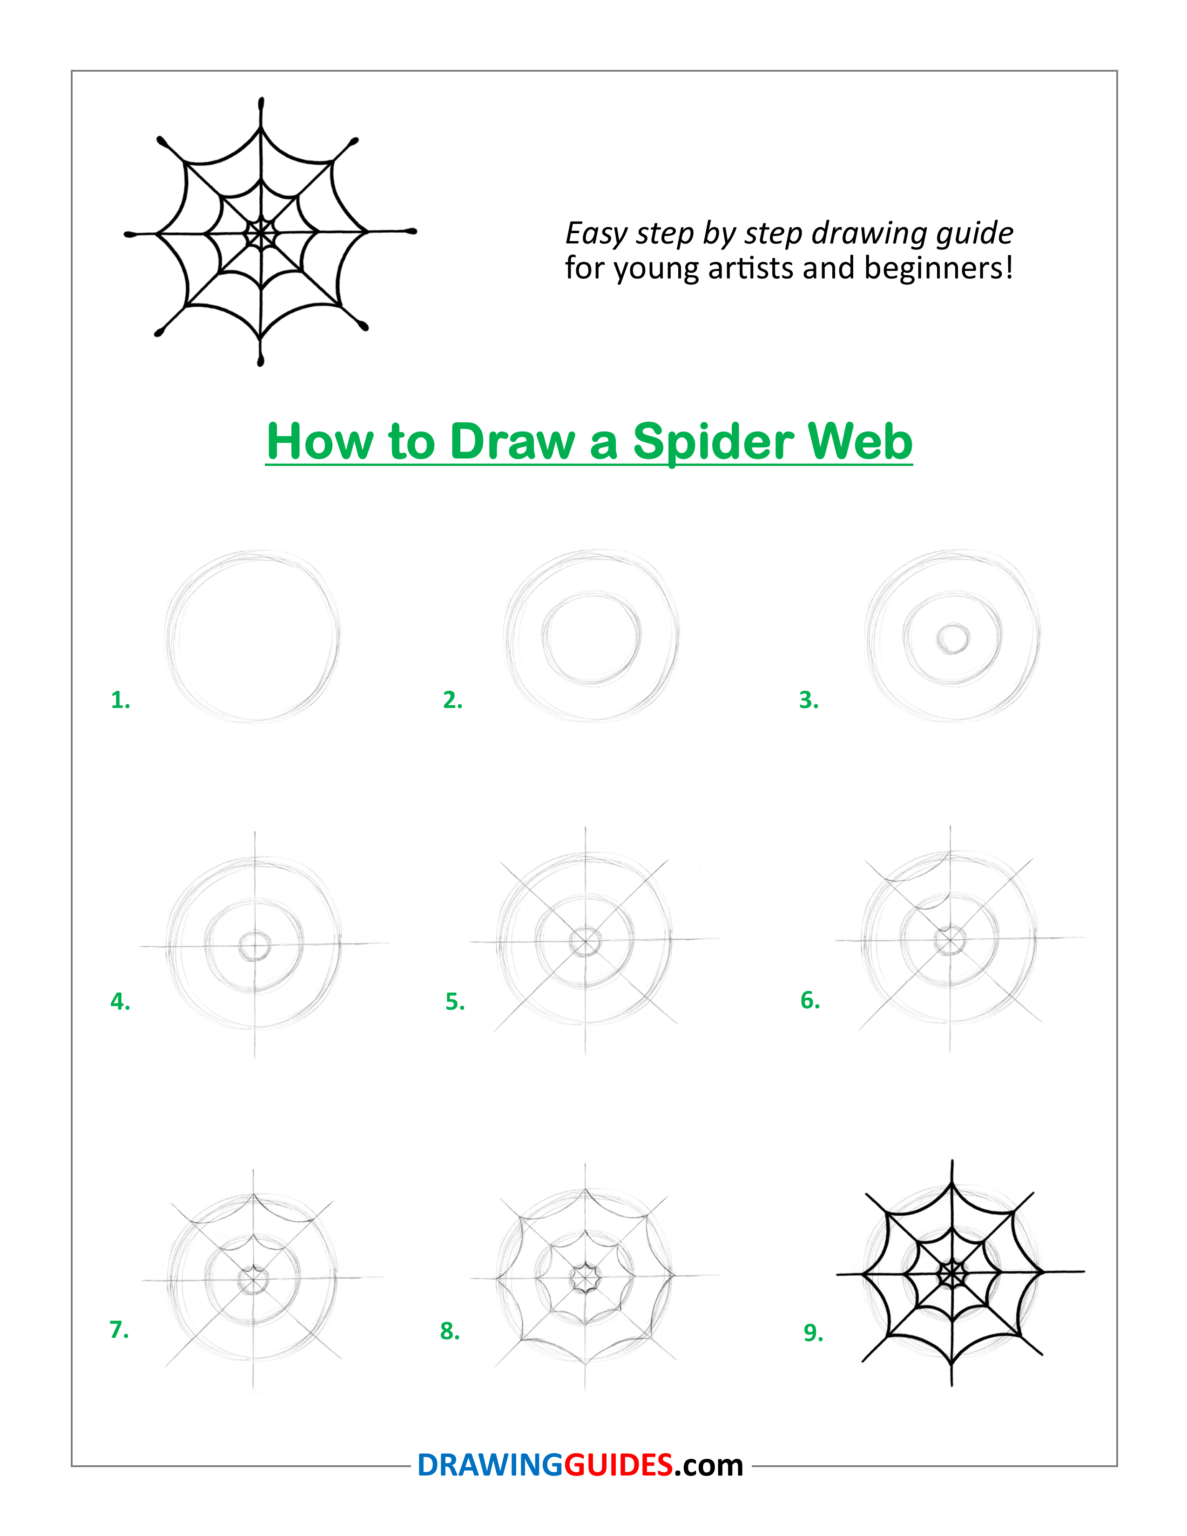 How to Draw a Spider Web Easy Step by Step Drawing Guide